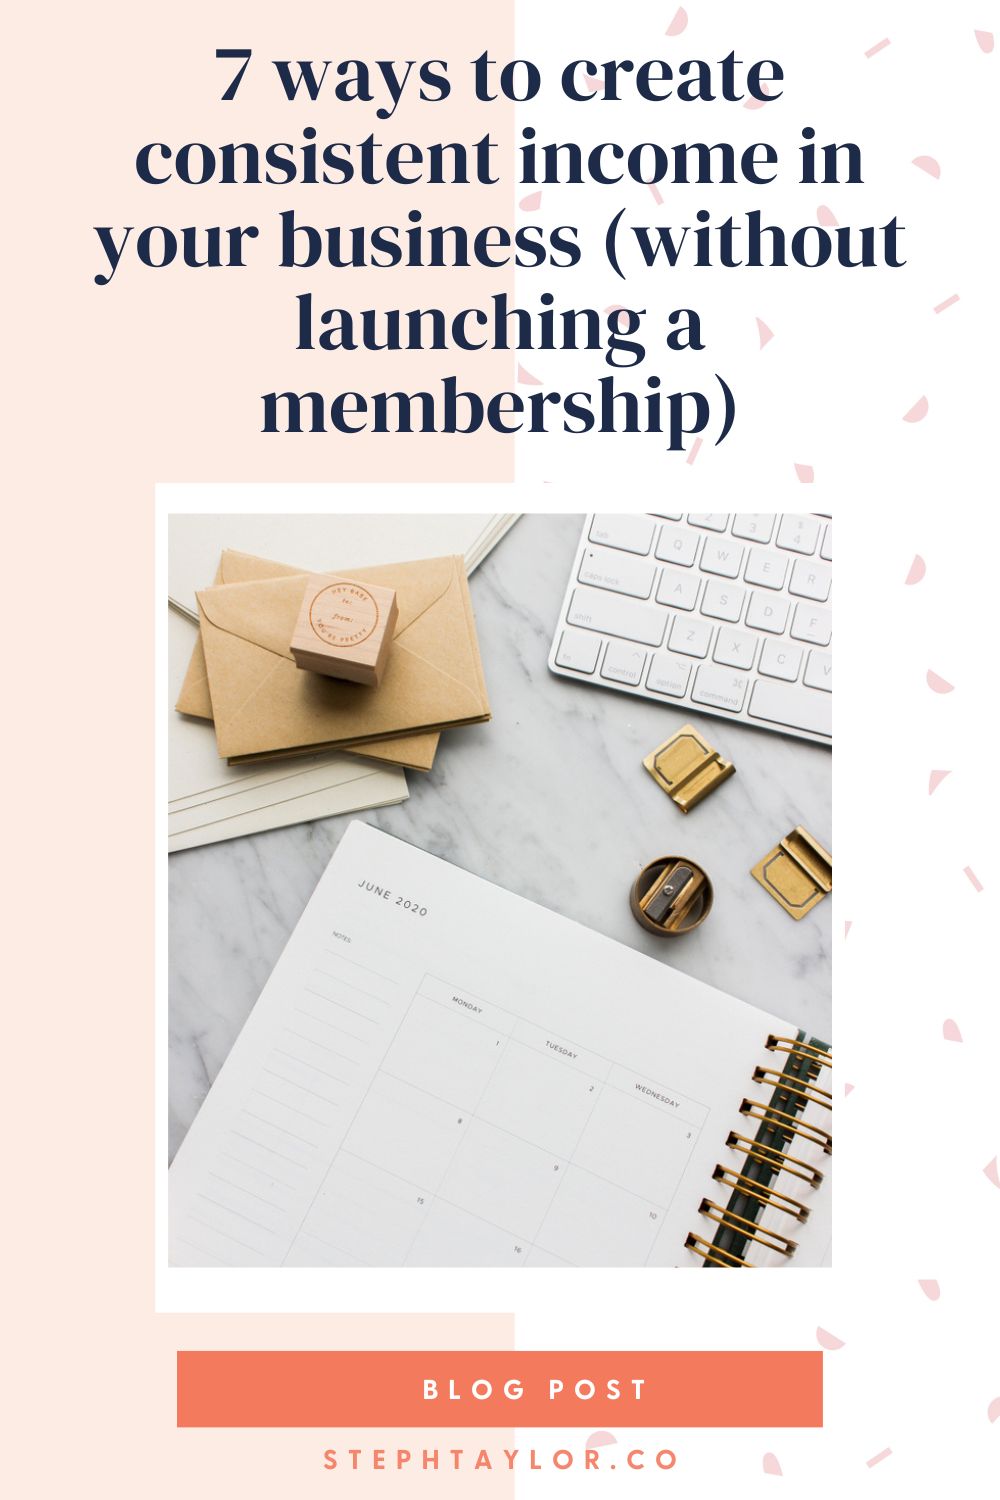 7 ways to create consistent income in your business (without launching a membership)